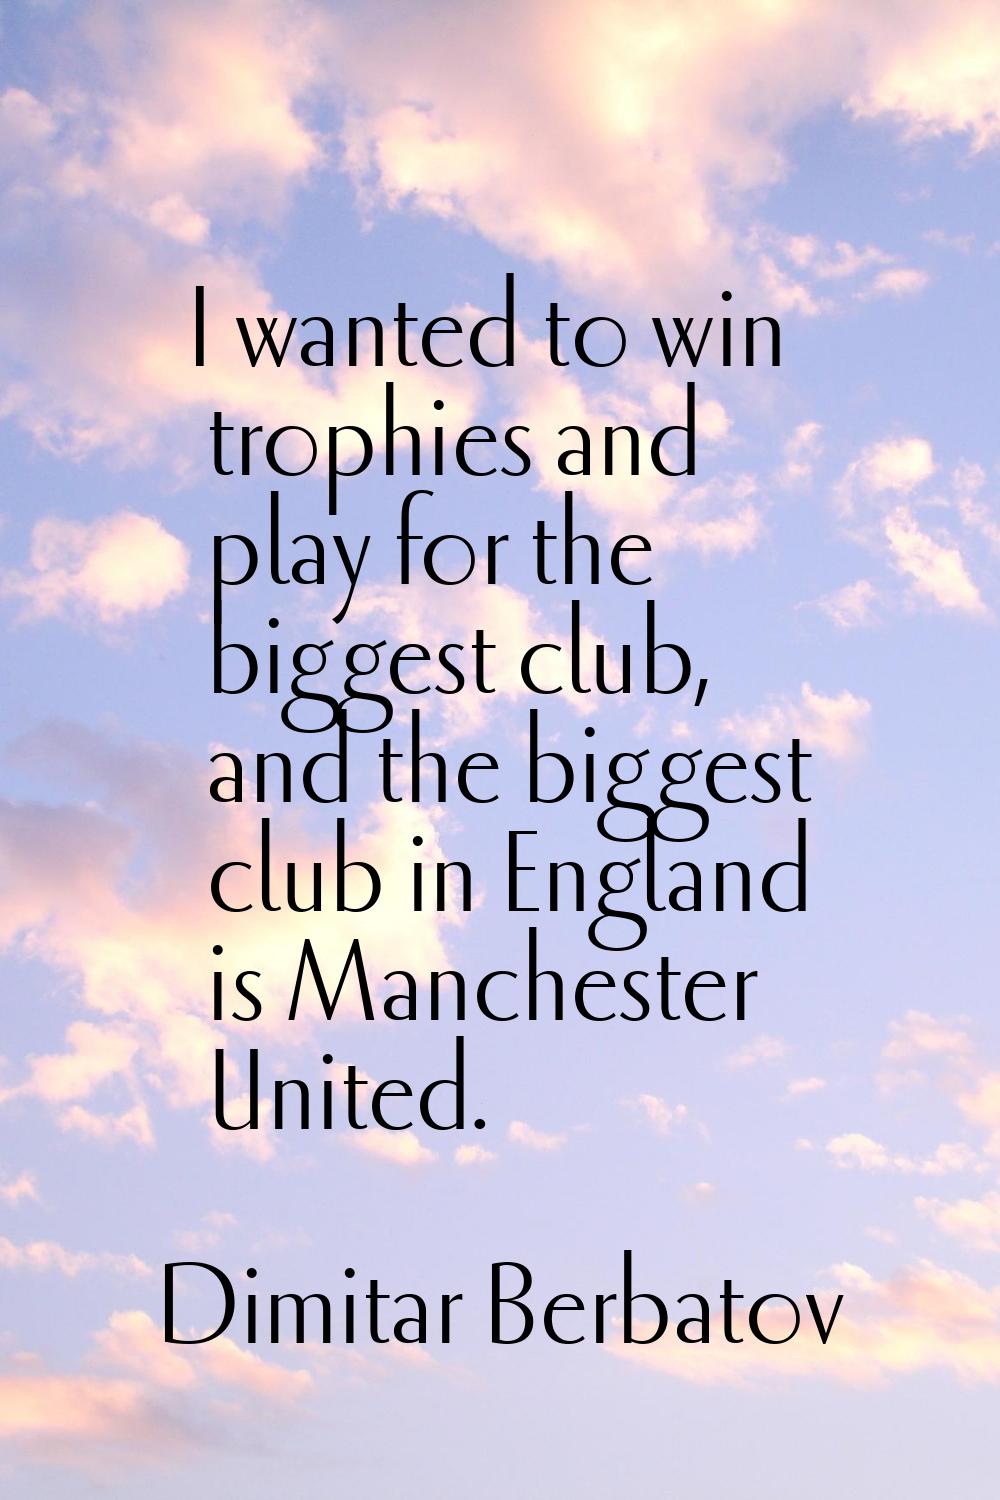 I wanted to win trophies and play for the biggest club, and the biggest club in England is Manchest